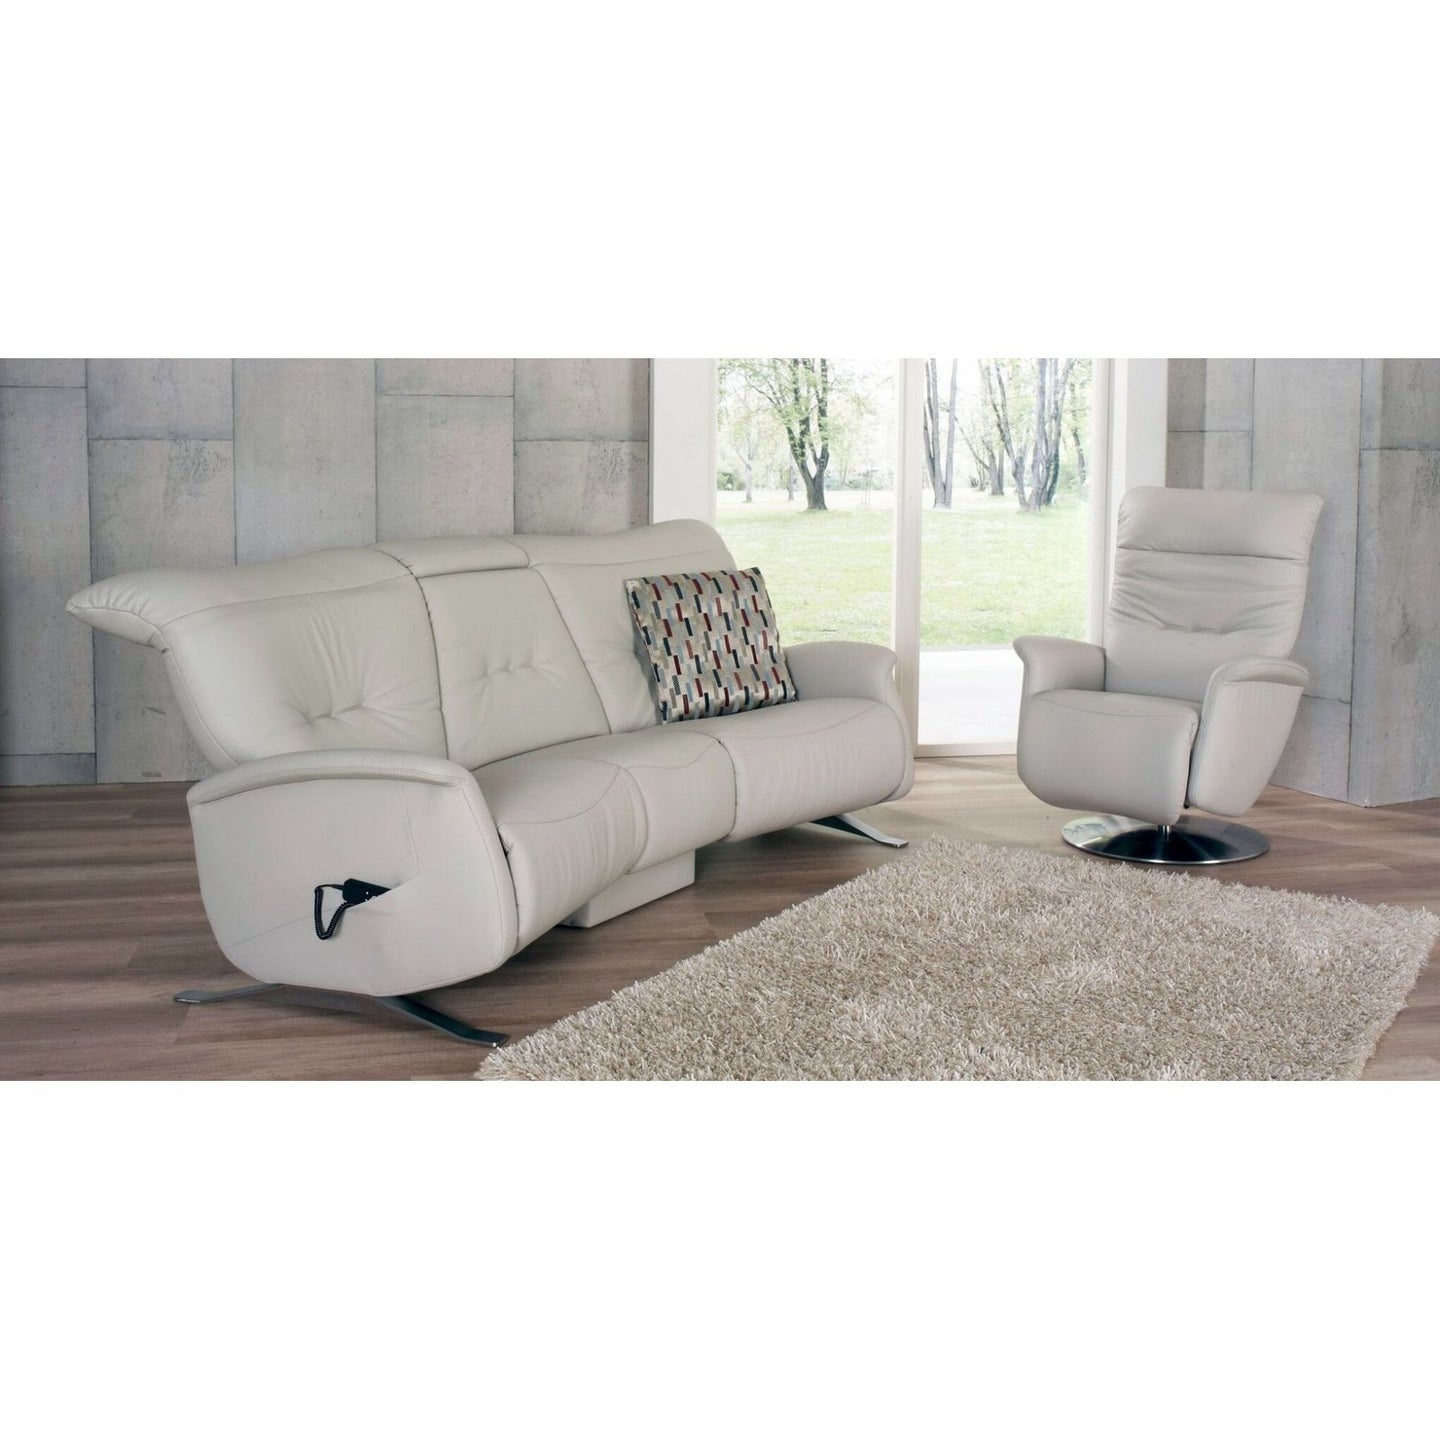 Himolla Cygnet 3 Seater Sofa with Table